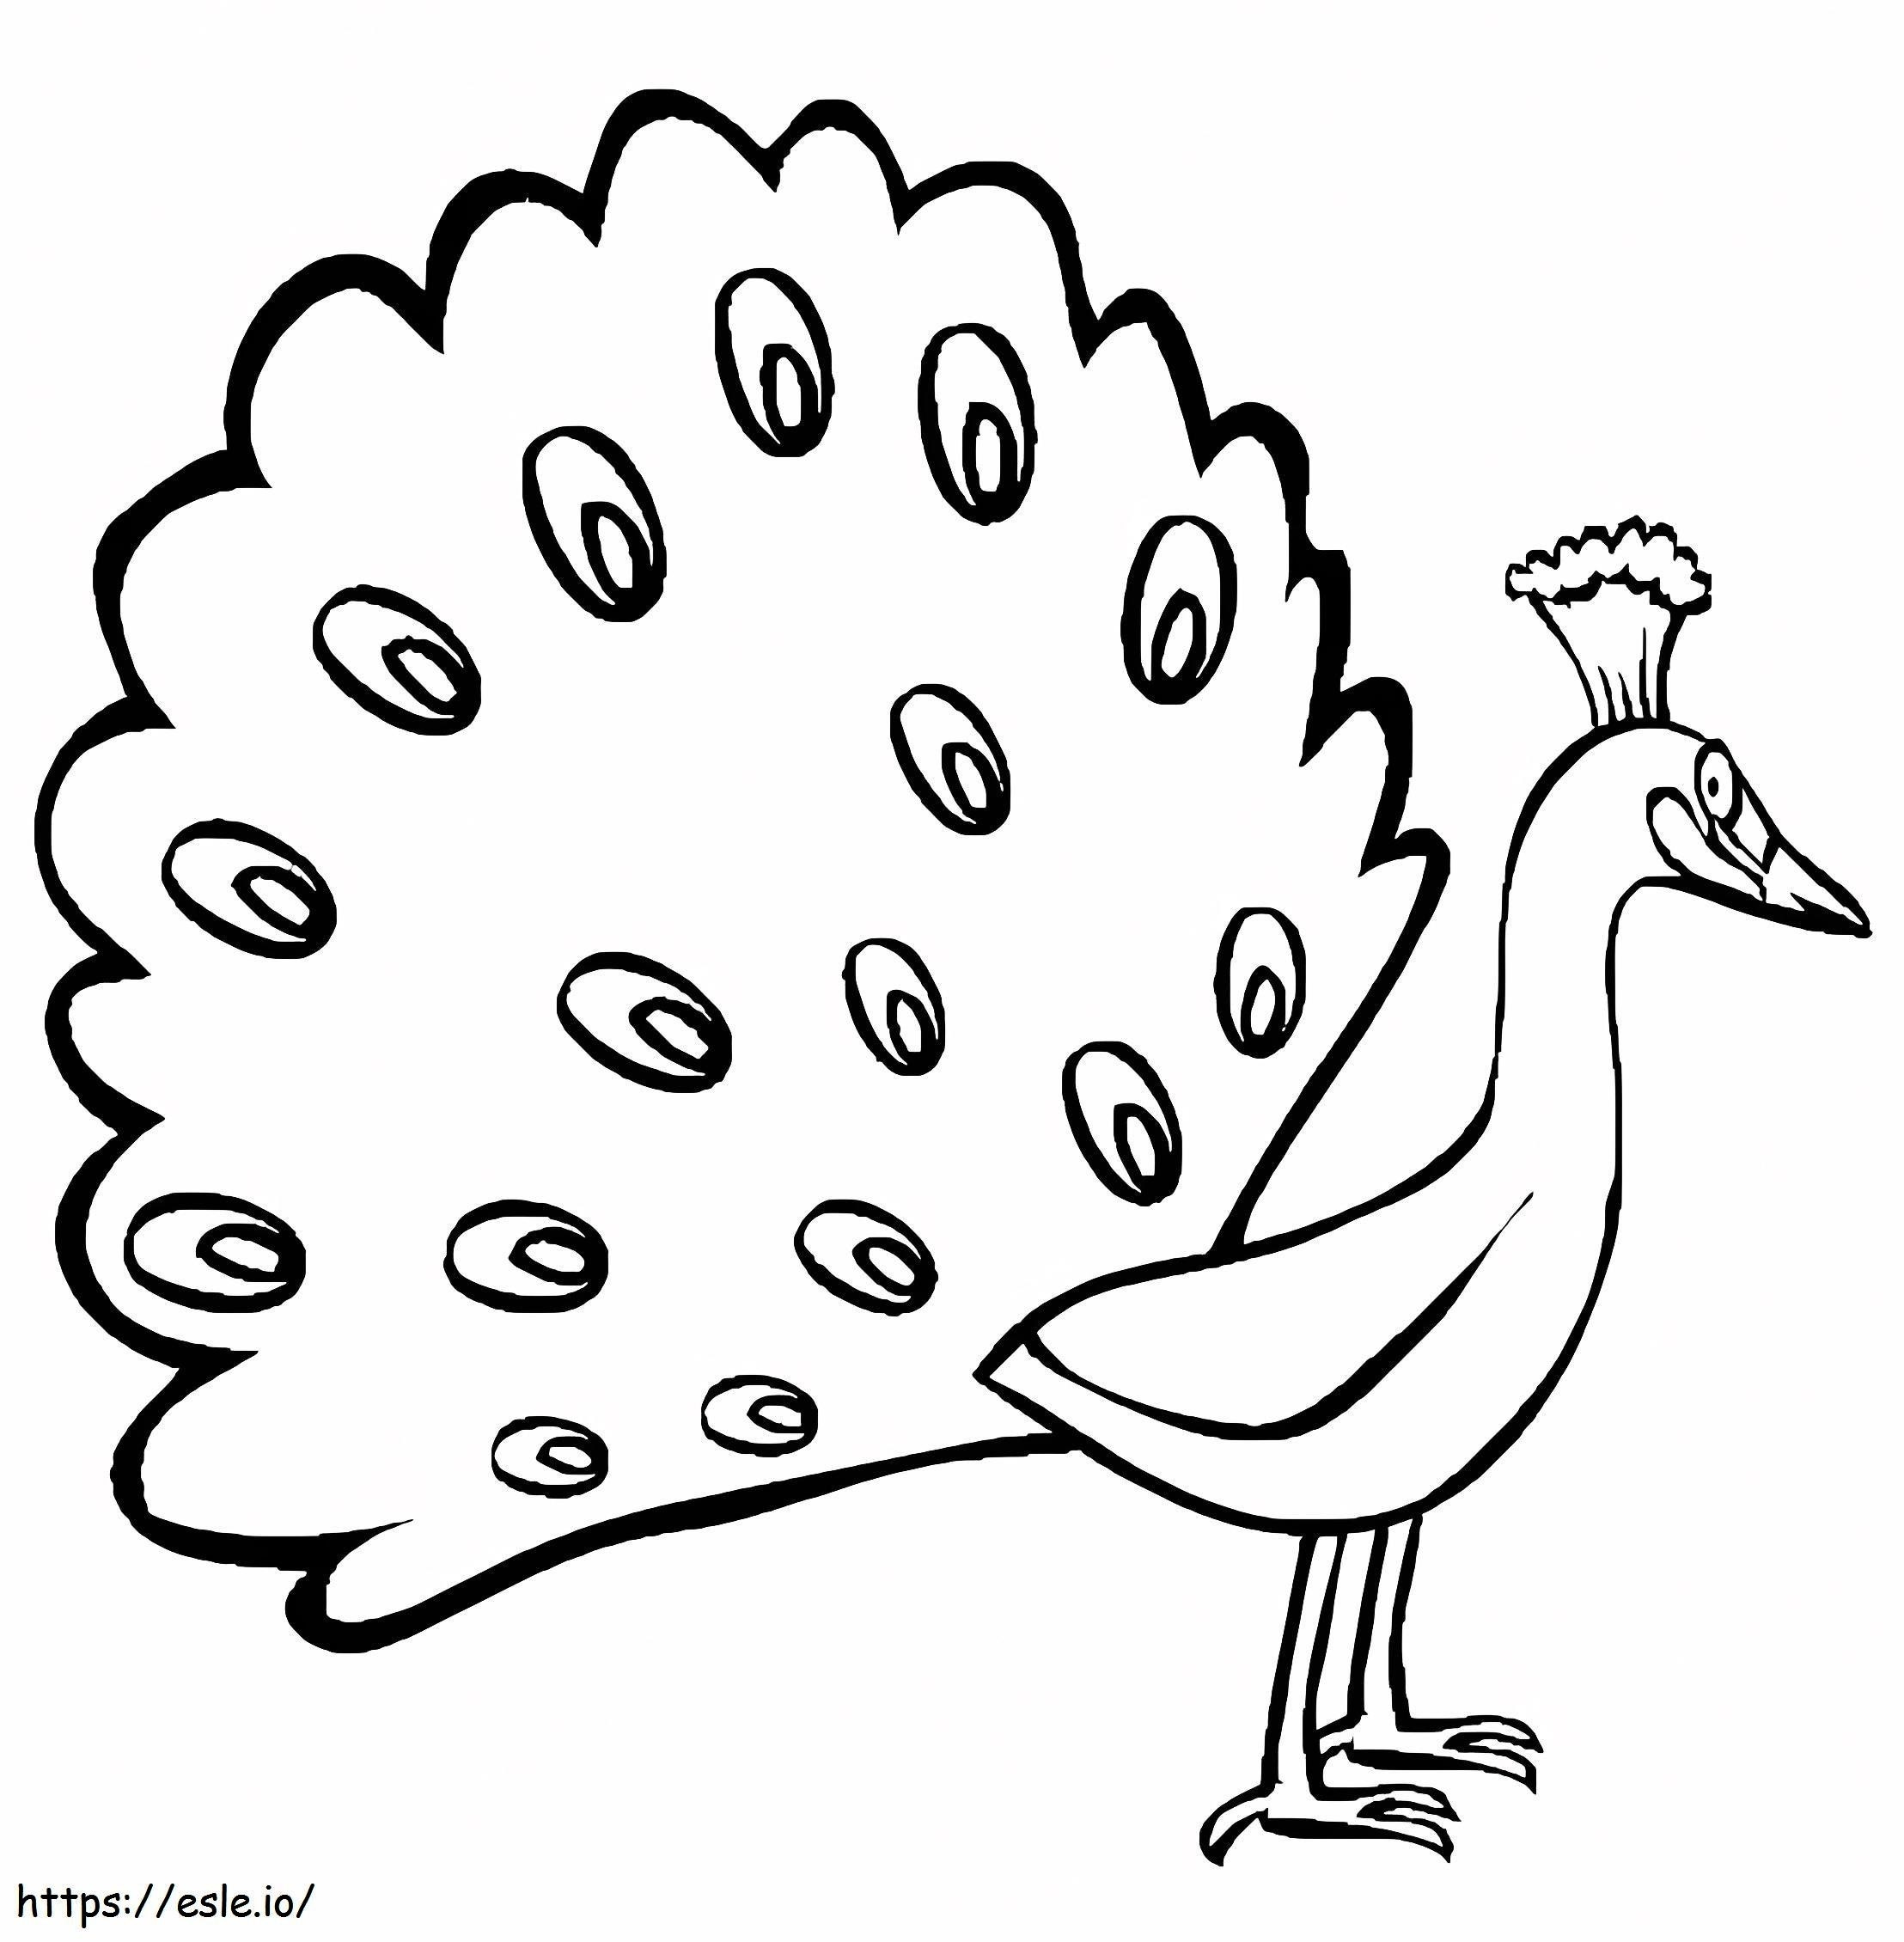 Perfect Peacock coloring page